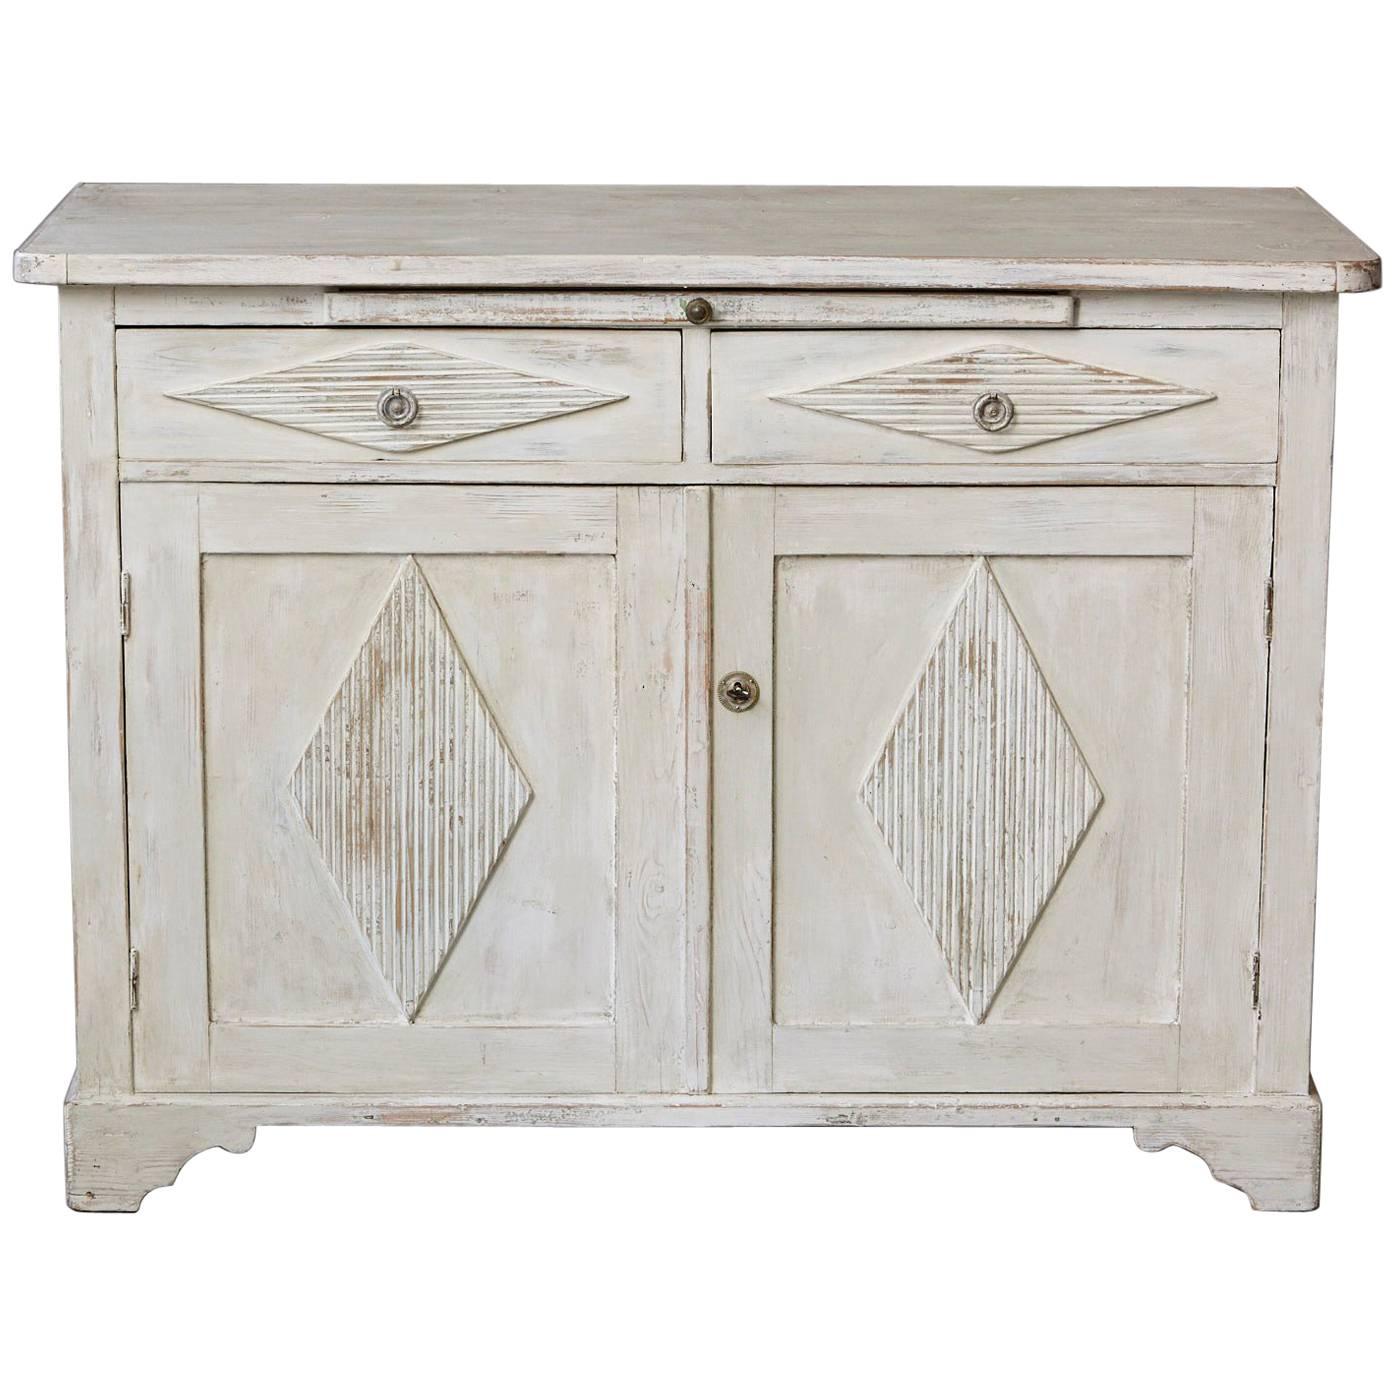 19th Century Swedish Gustavian Sideboard with Diamond Shape Reeded Details